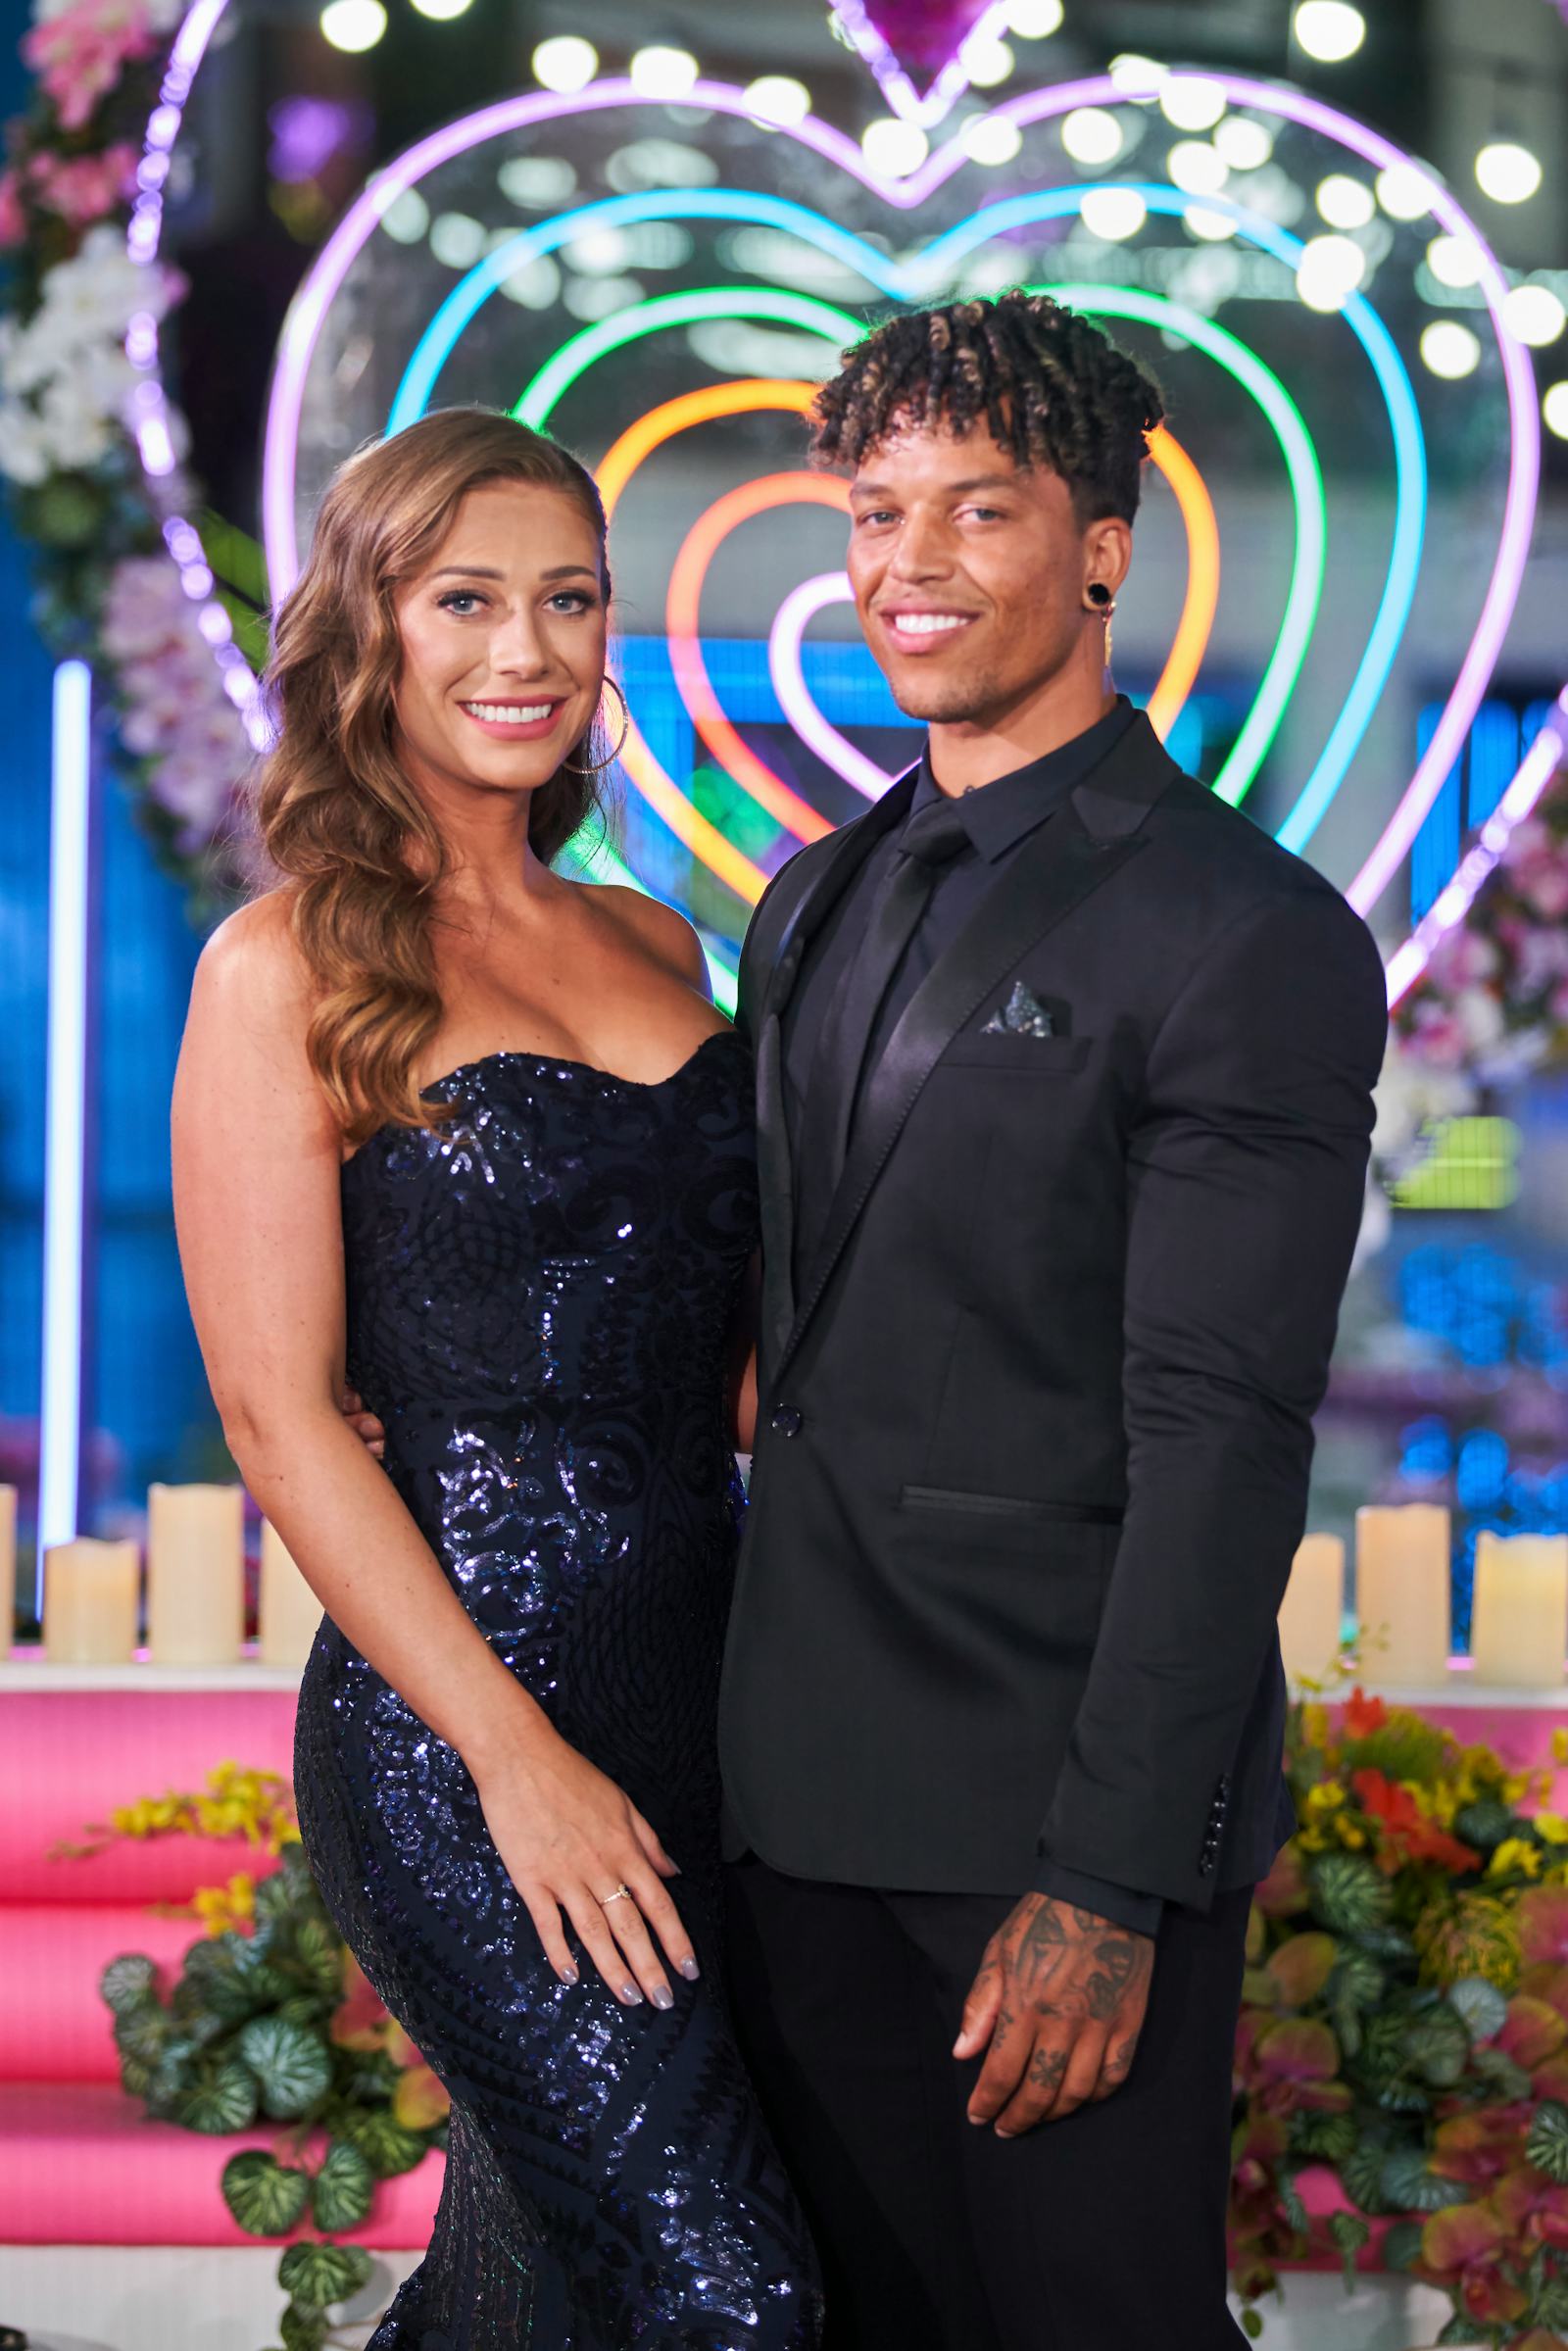 Korey & Olivia From 'Love Island US' Are No Longer Together